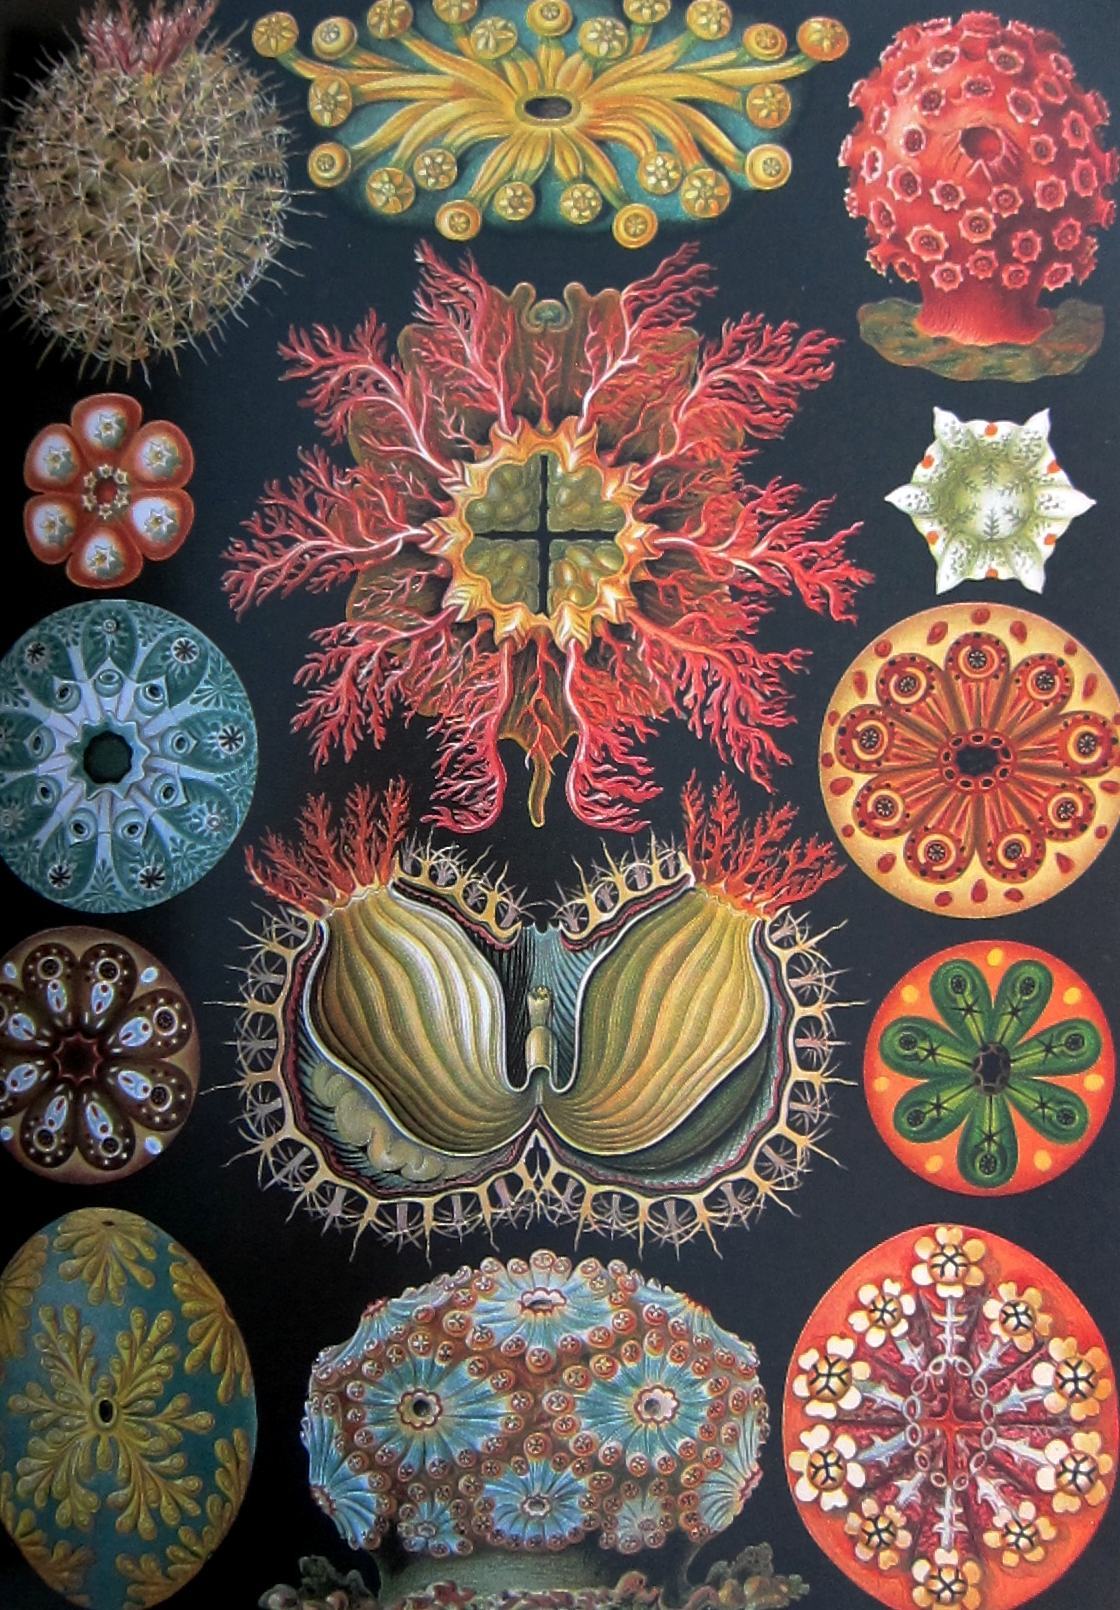 jtotheizzoe:  winkbooks:  Art Forms in Nature – Eye-popping art prints from an